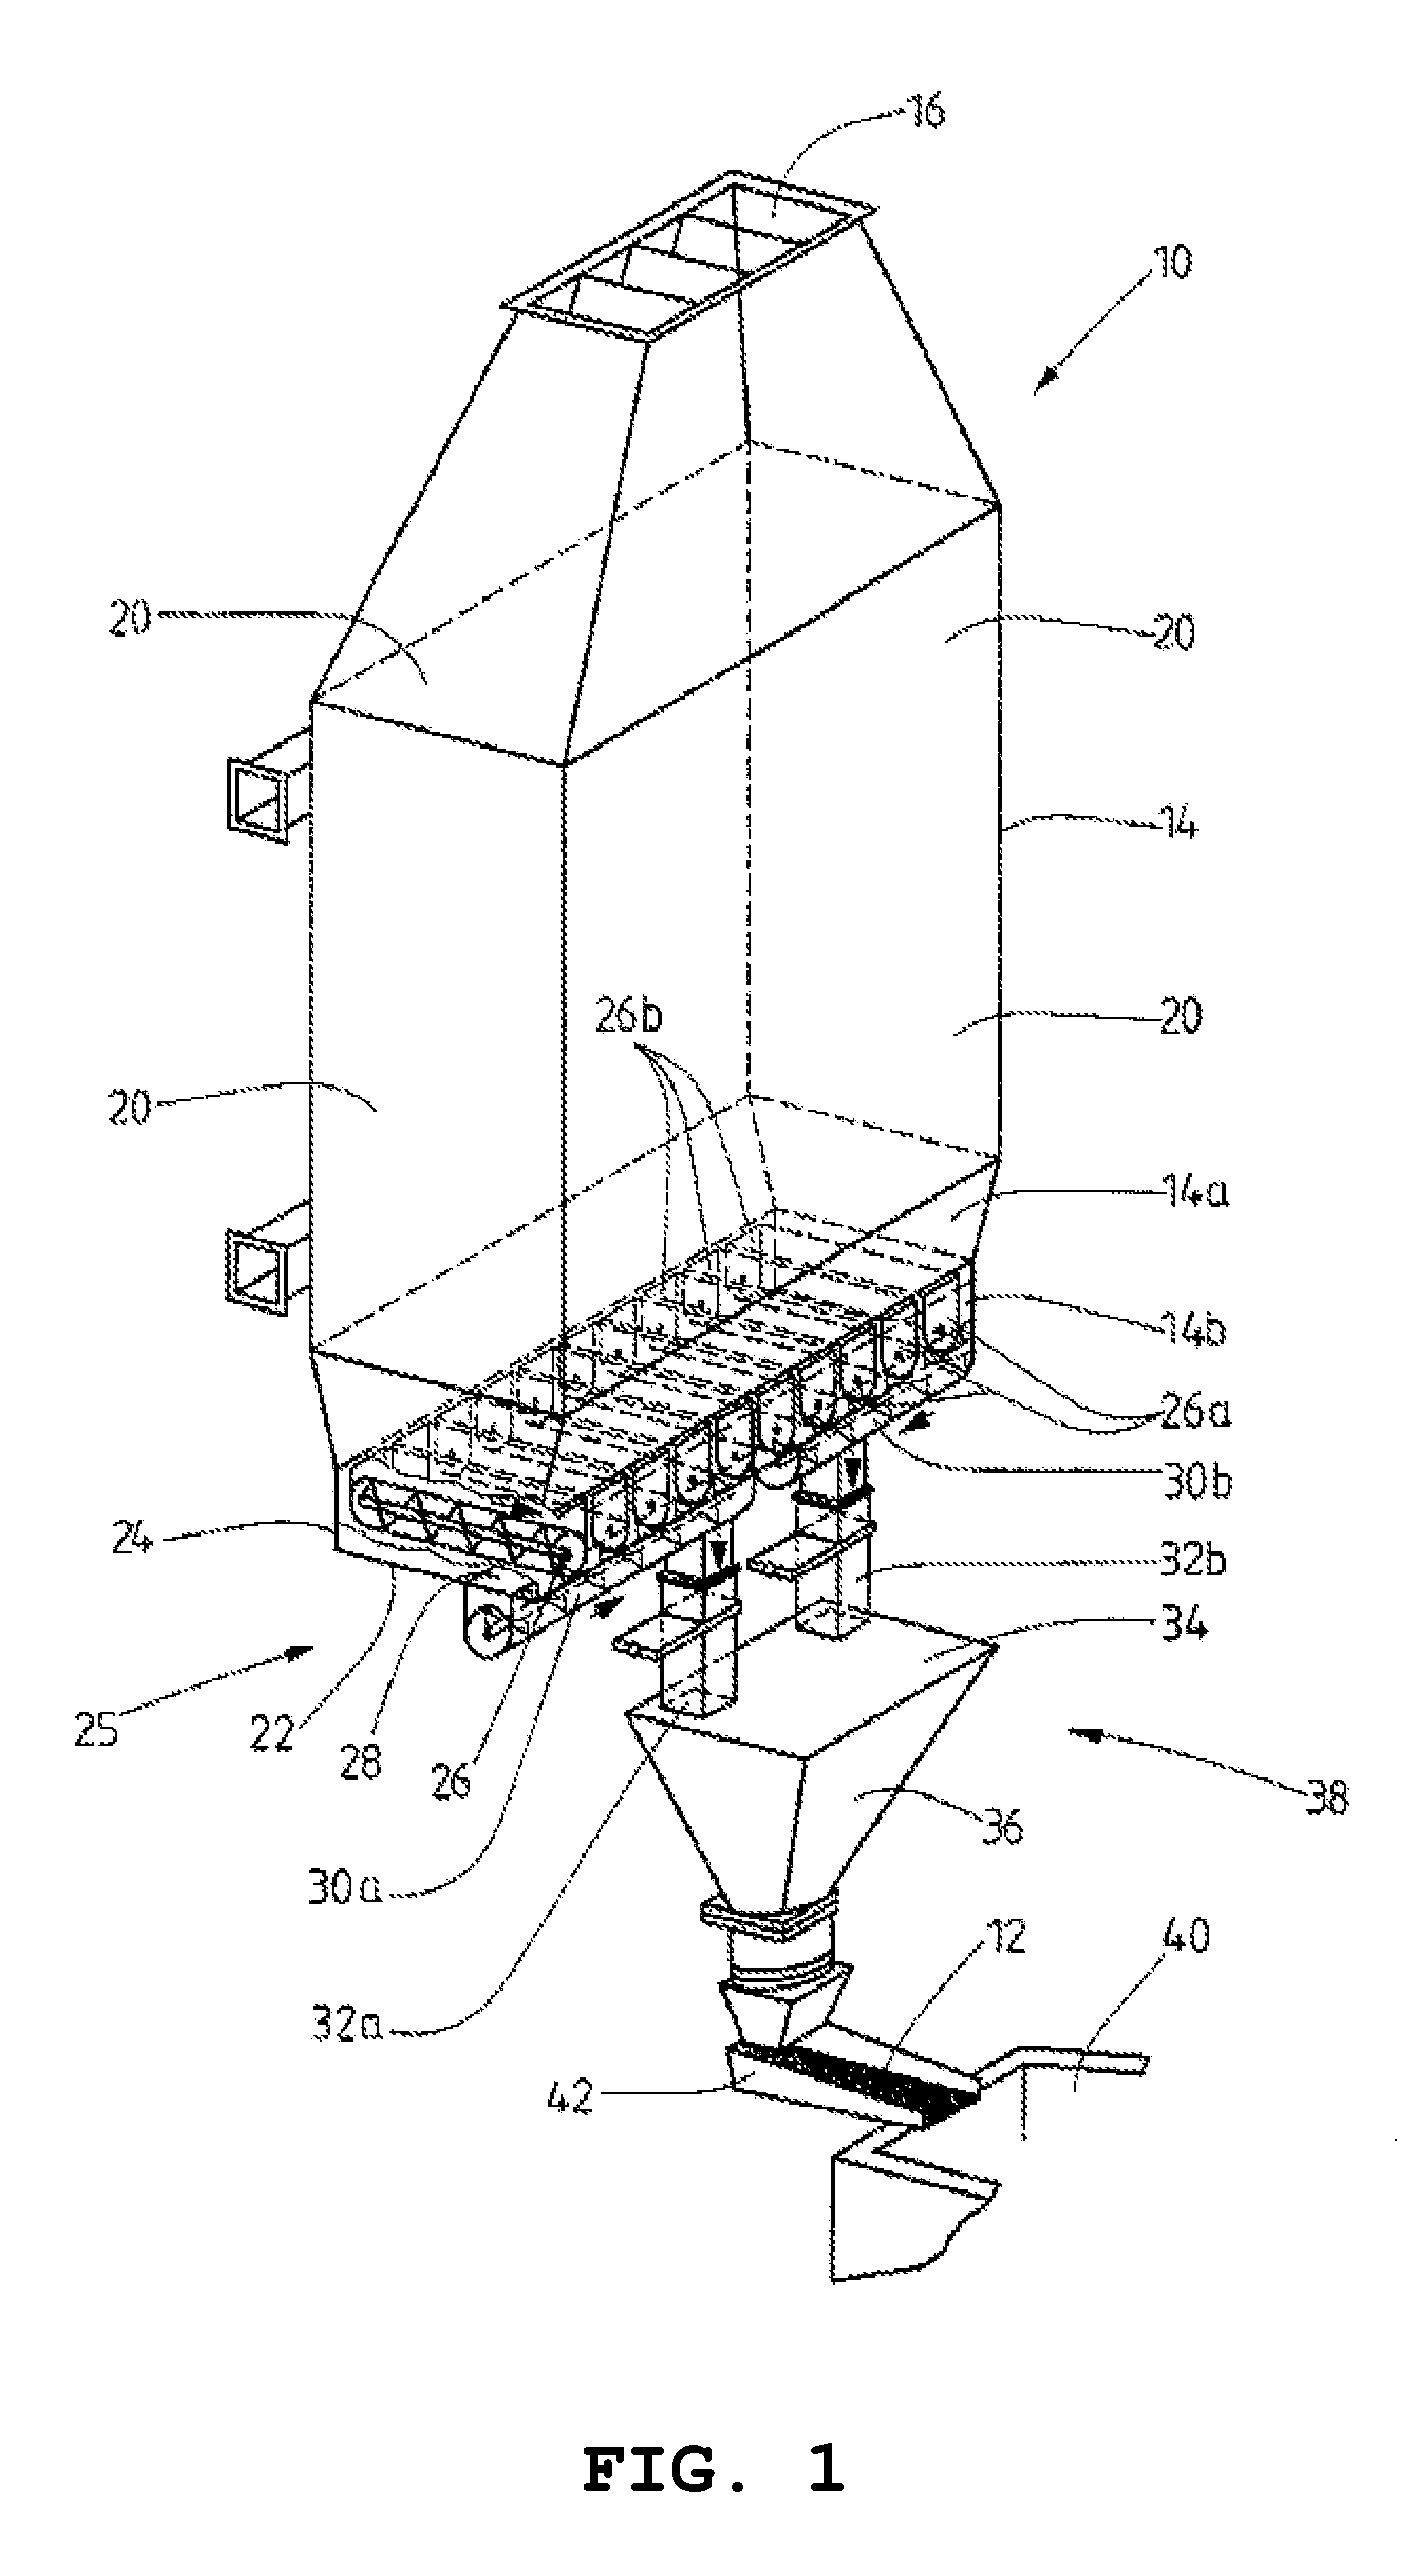 Apparatus for preheating batches of glass cullet